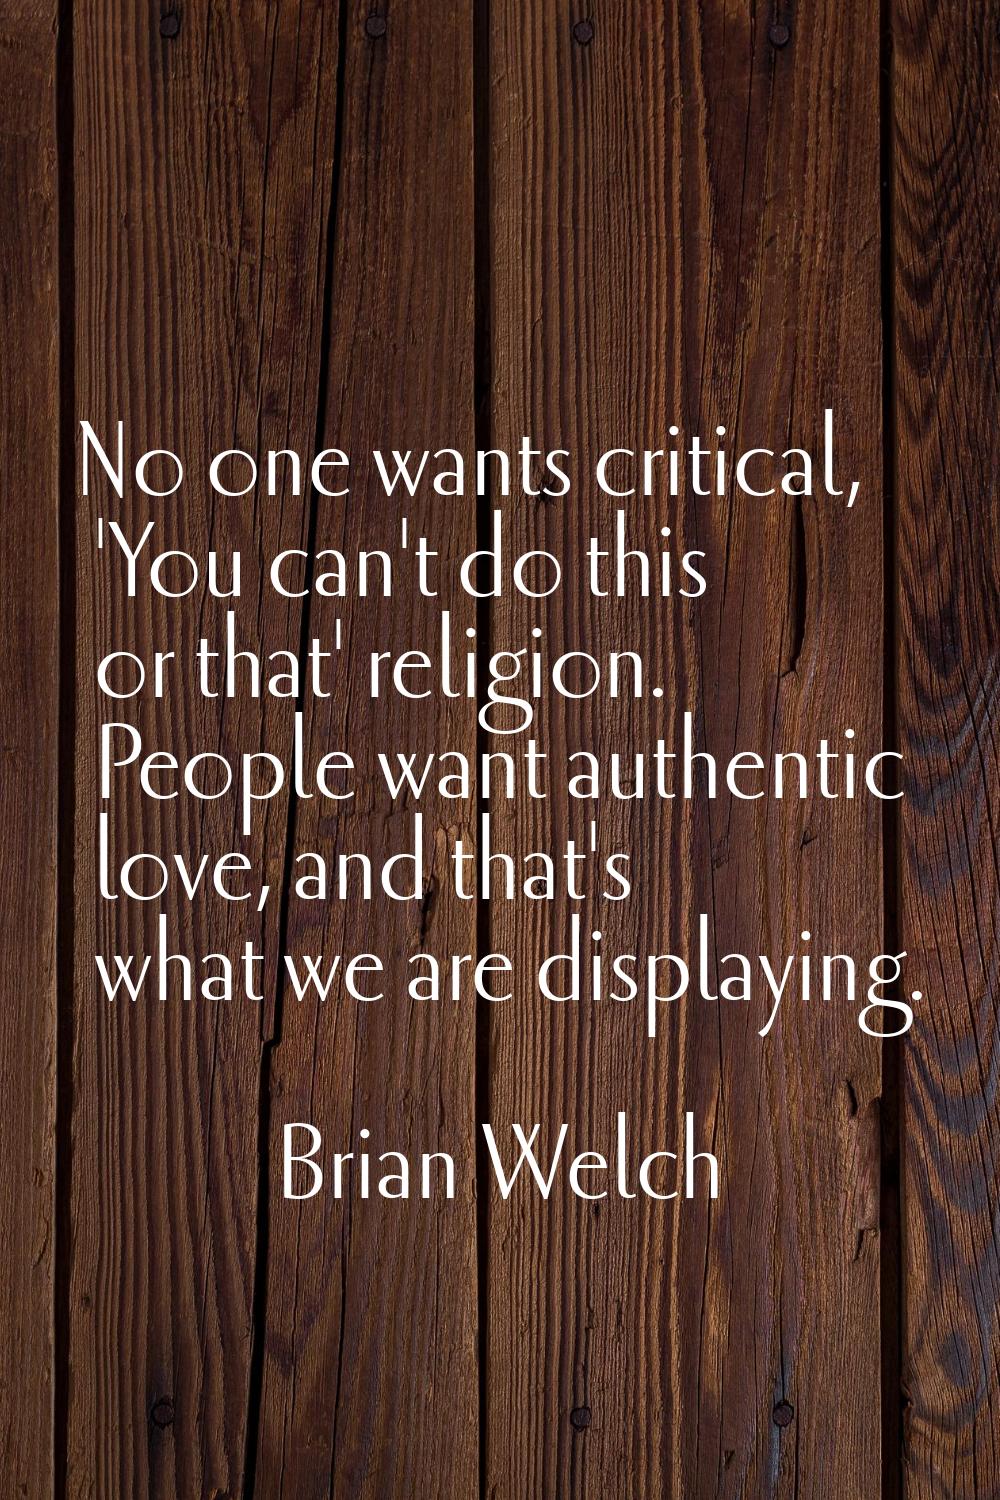 No one wants critical, 'You can't do this or that' religion. People want authentic love, and that's